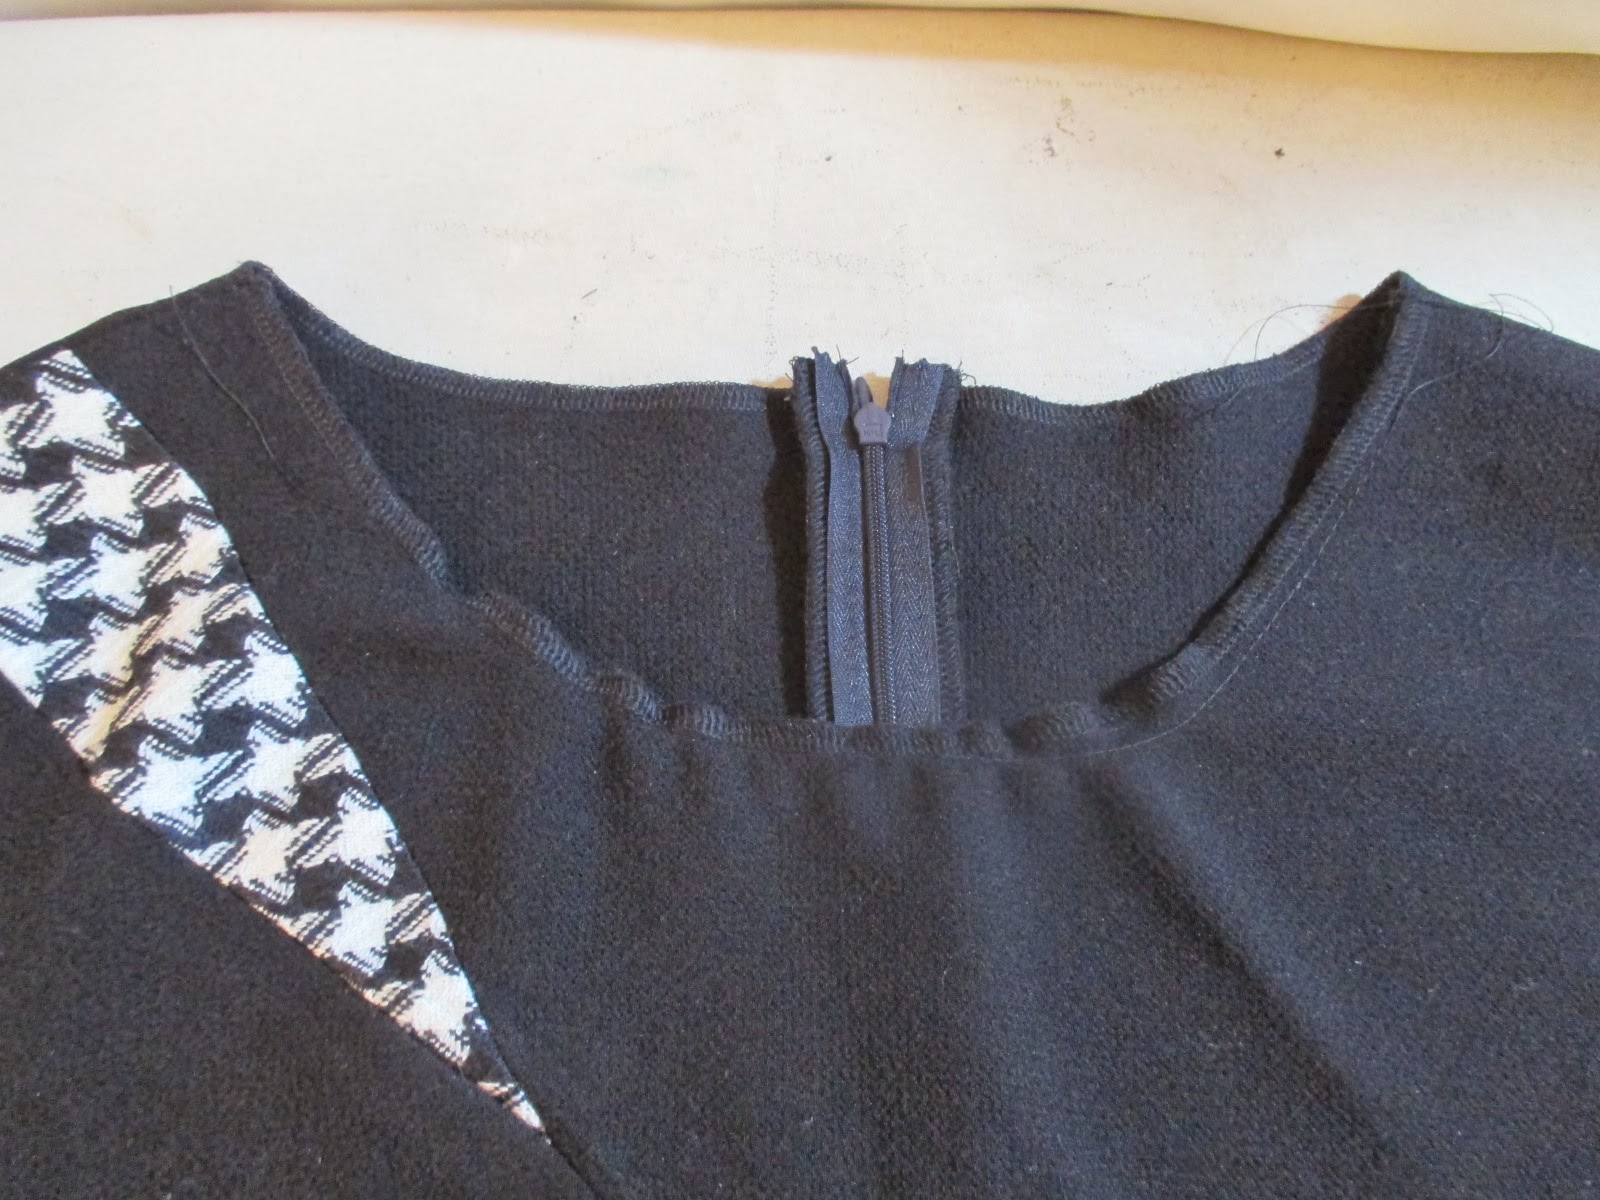 Diary of a Sewing Fanatic: Slow Rolling on Vogue 1370